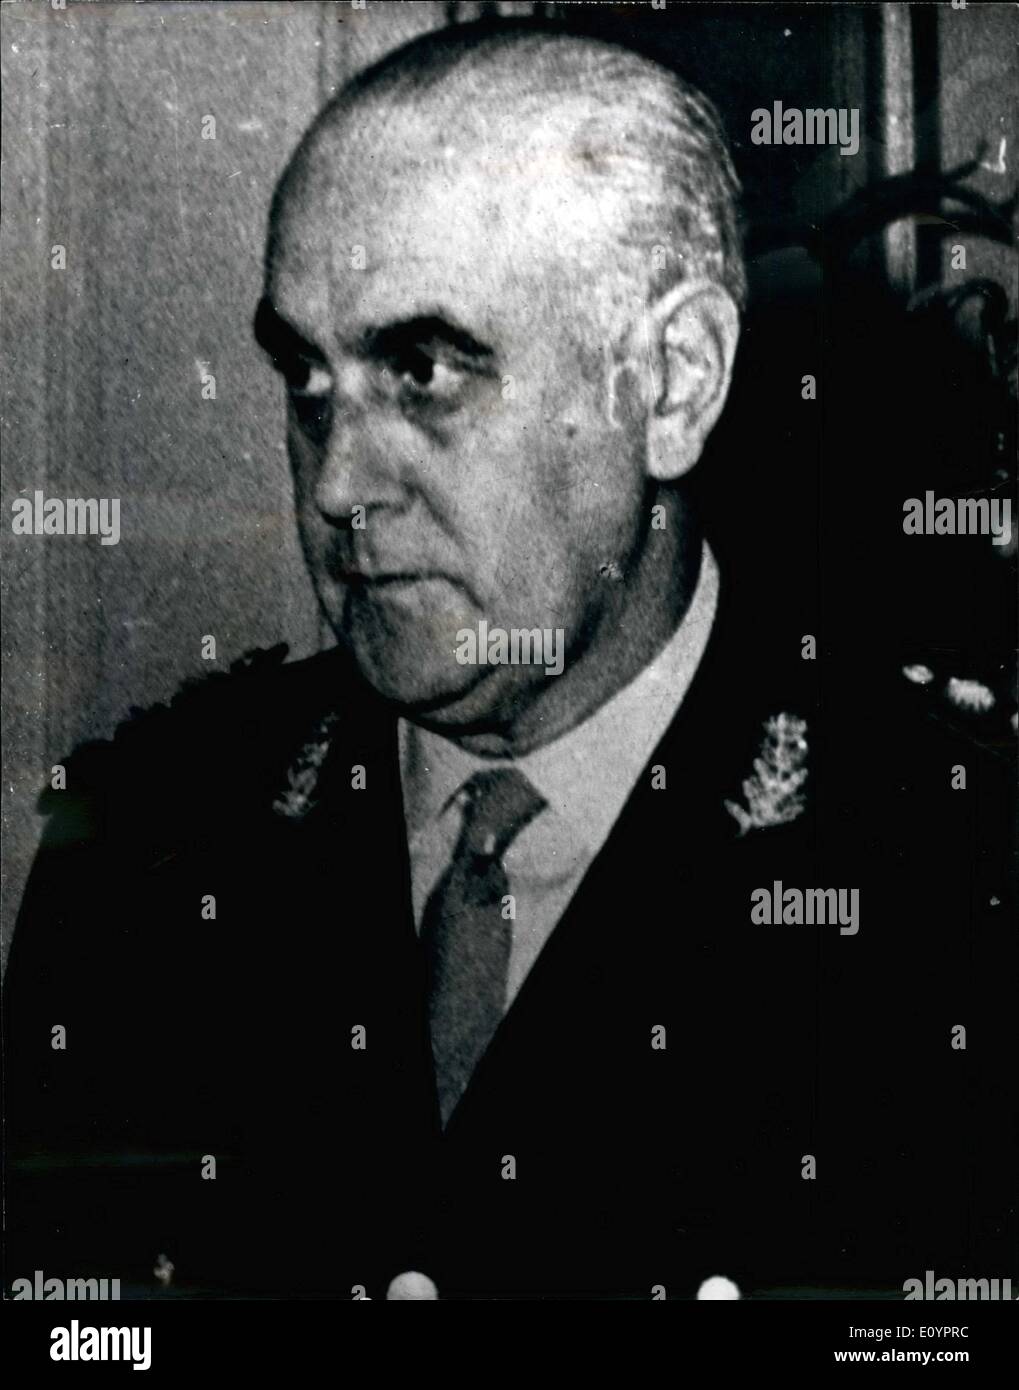 Mar. 03, 1971 - Argentina's Armed Forces overthrow President Roberto Levingston in Bloodless coup.: Argentines armed force overthrow. President Roberto Levingston is a bloodless coup in Buecoss Airce today and announced that a three-men military junta would run the country. The Army turned the tables on the President after he tried to fire arm-commander-in-chief and military junta leader Lt. General Alejandro anusse. Photo Shows General anusse the new strong an of Argentina. Stock Photo